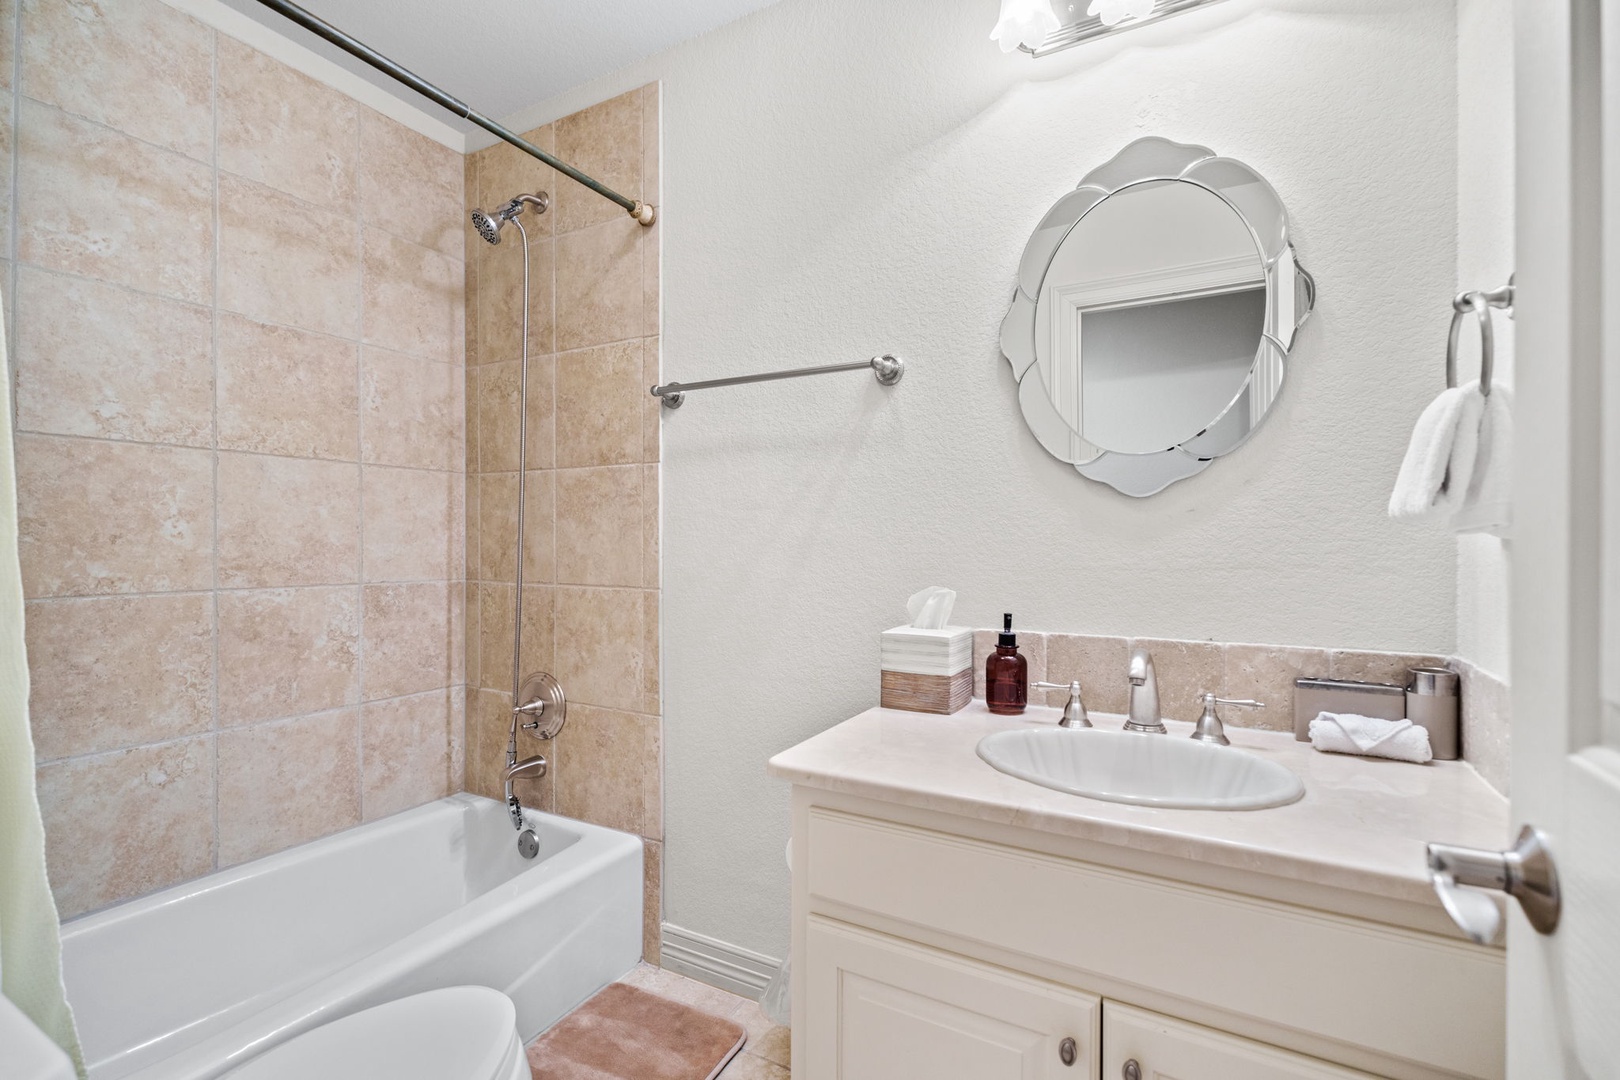 This full bath on the 2nd floor offers a single vanity & shower/tub combo